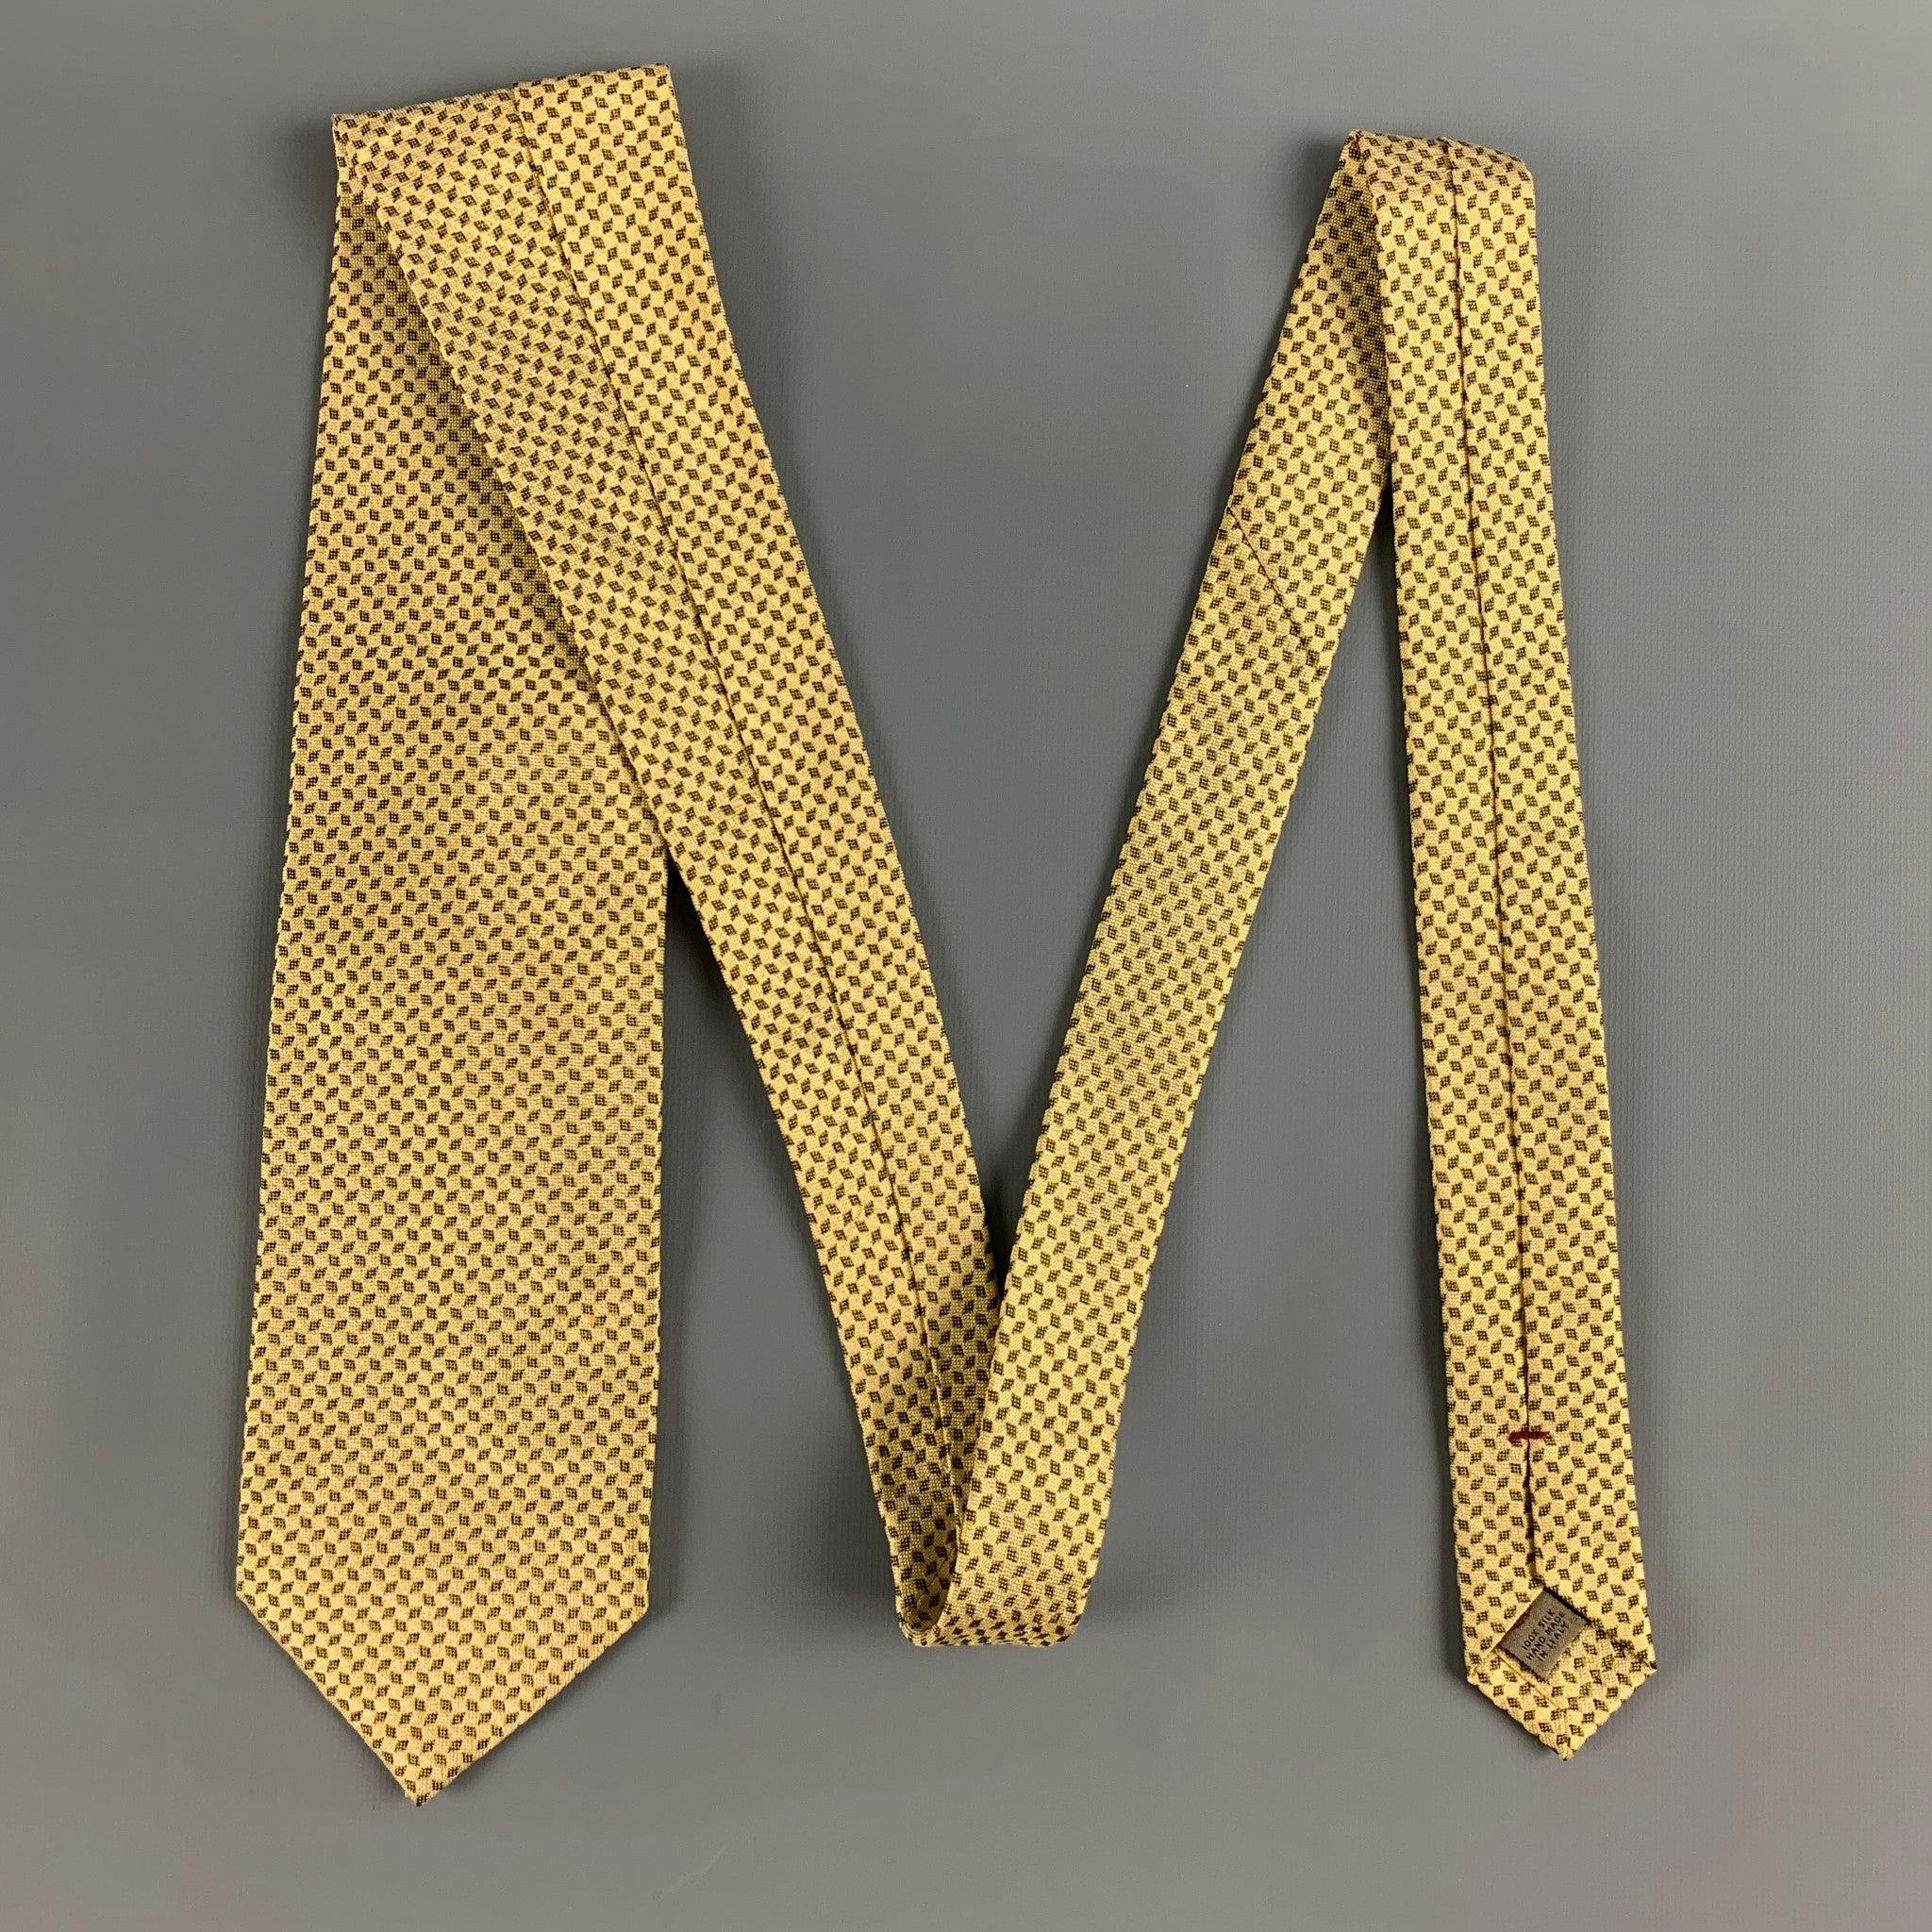 LUCIANO BARBERA classic tie comes in 100% silk, featuring a yellow and black geometric design. Handmade in Italy.Very Good Pre-Owned Condition. 

Measurements: 
  Width: 3 inches Length: 58 inches 

  
  
 
Reference: 125911
Category: Tie
More